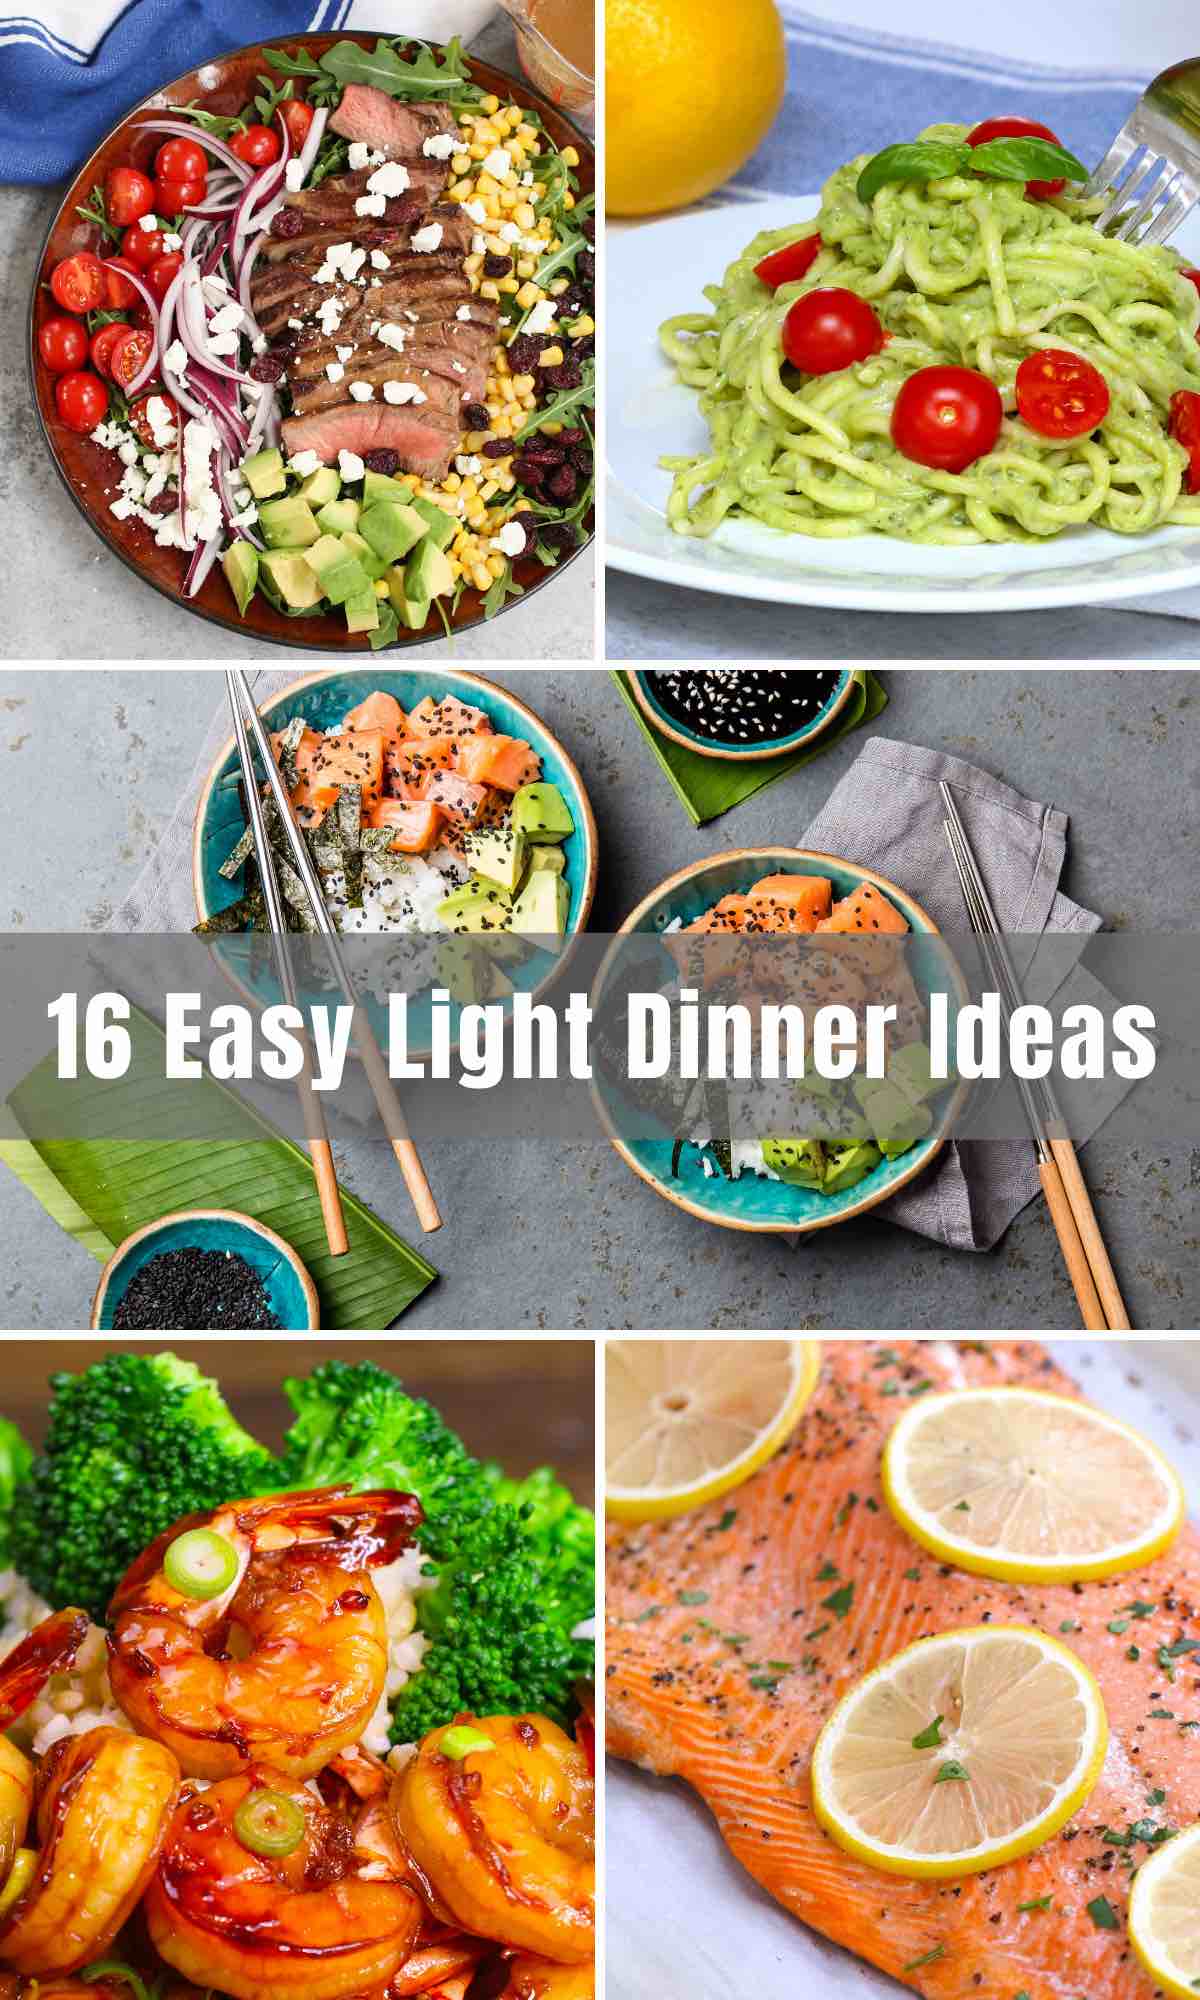 Are you looking for healthy but satisfying meals that will make your feel good? Below you will find 16 Easy Light Dinner Ideas that your family will love. These simple recipes are super simple and fast to make. Go on, give them a try tonight, you’re promised delicious meals with incredible results!!